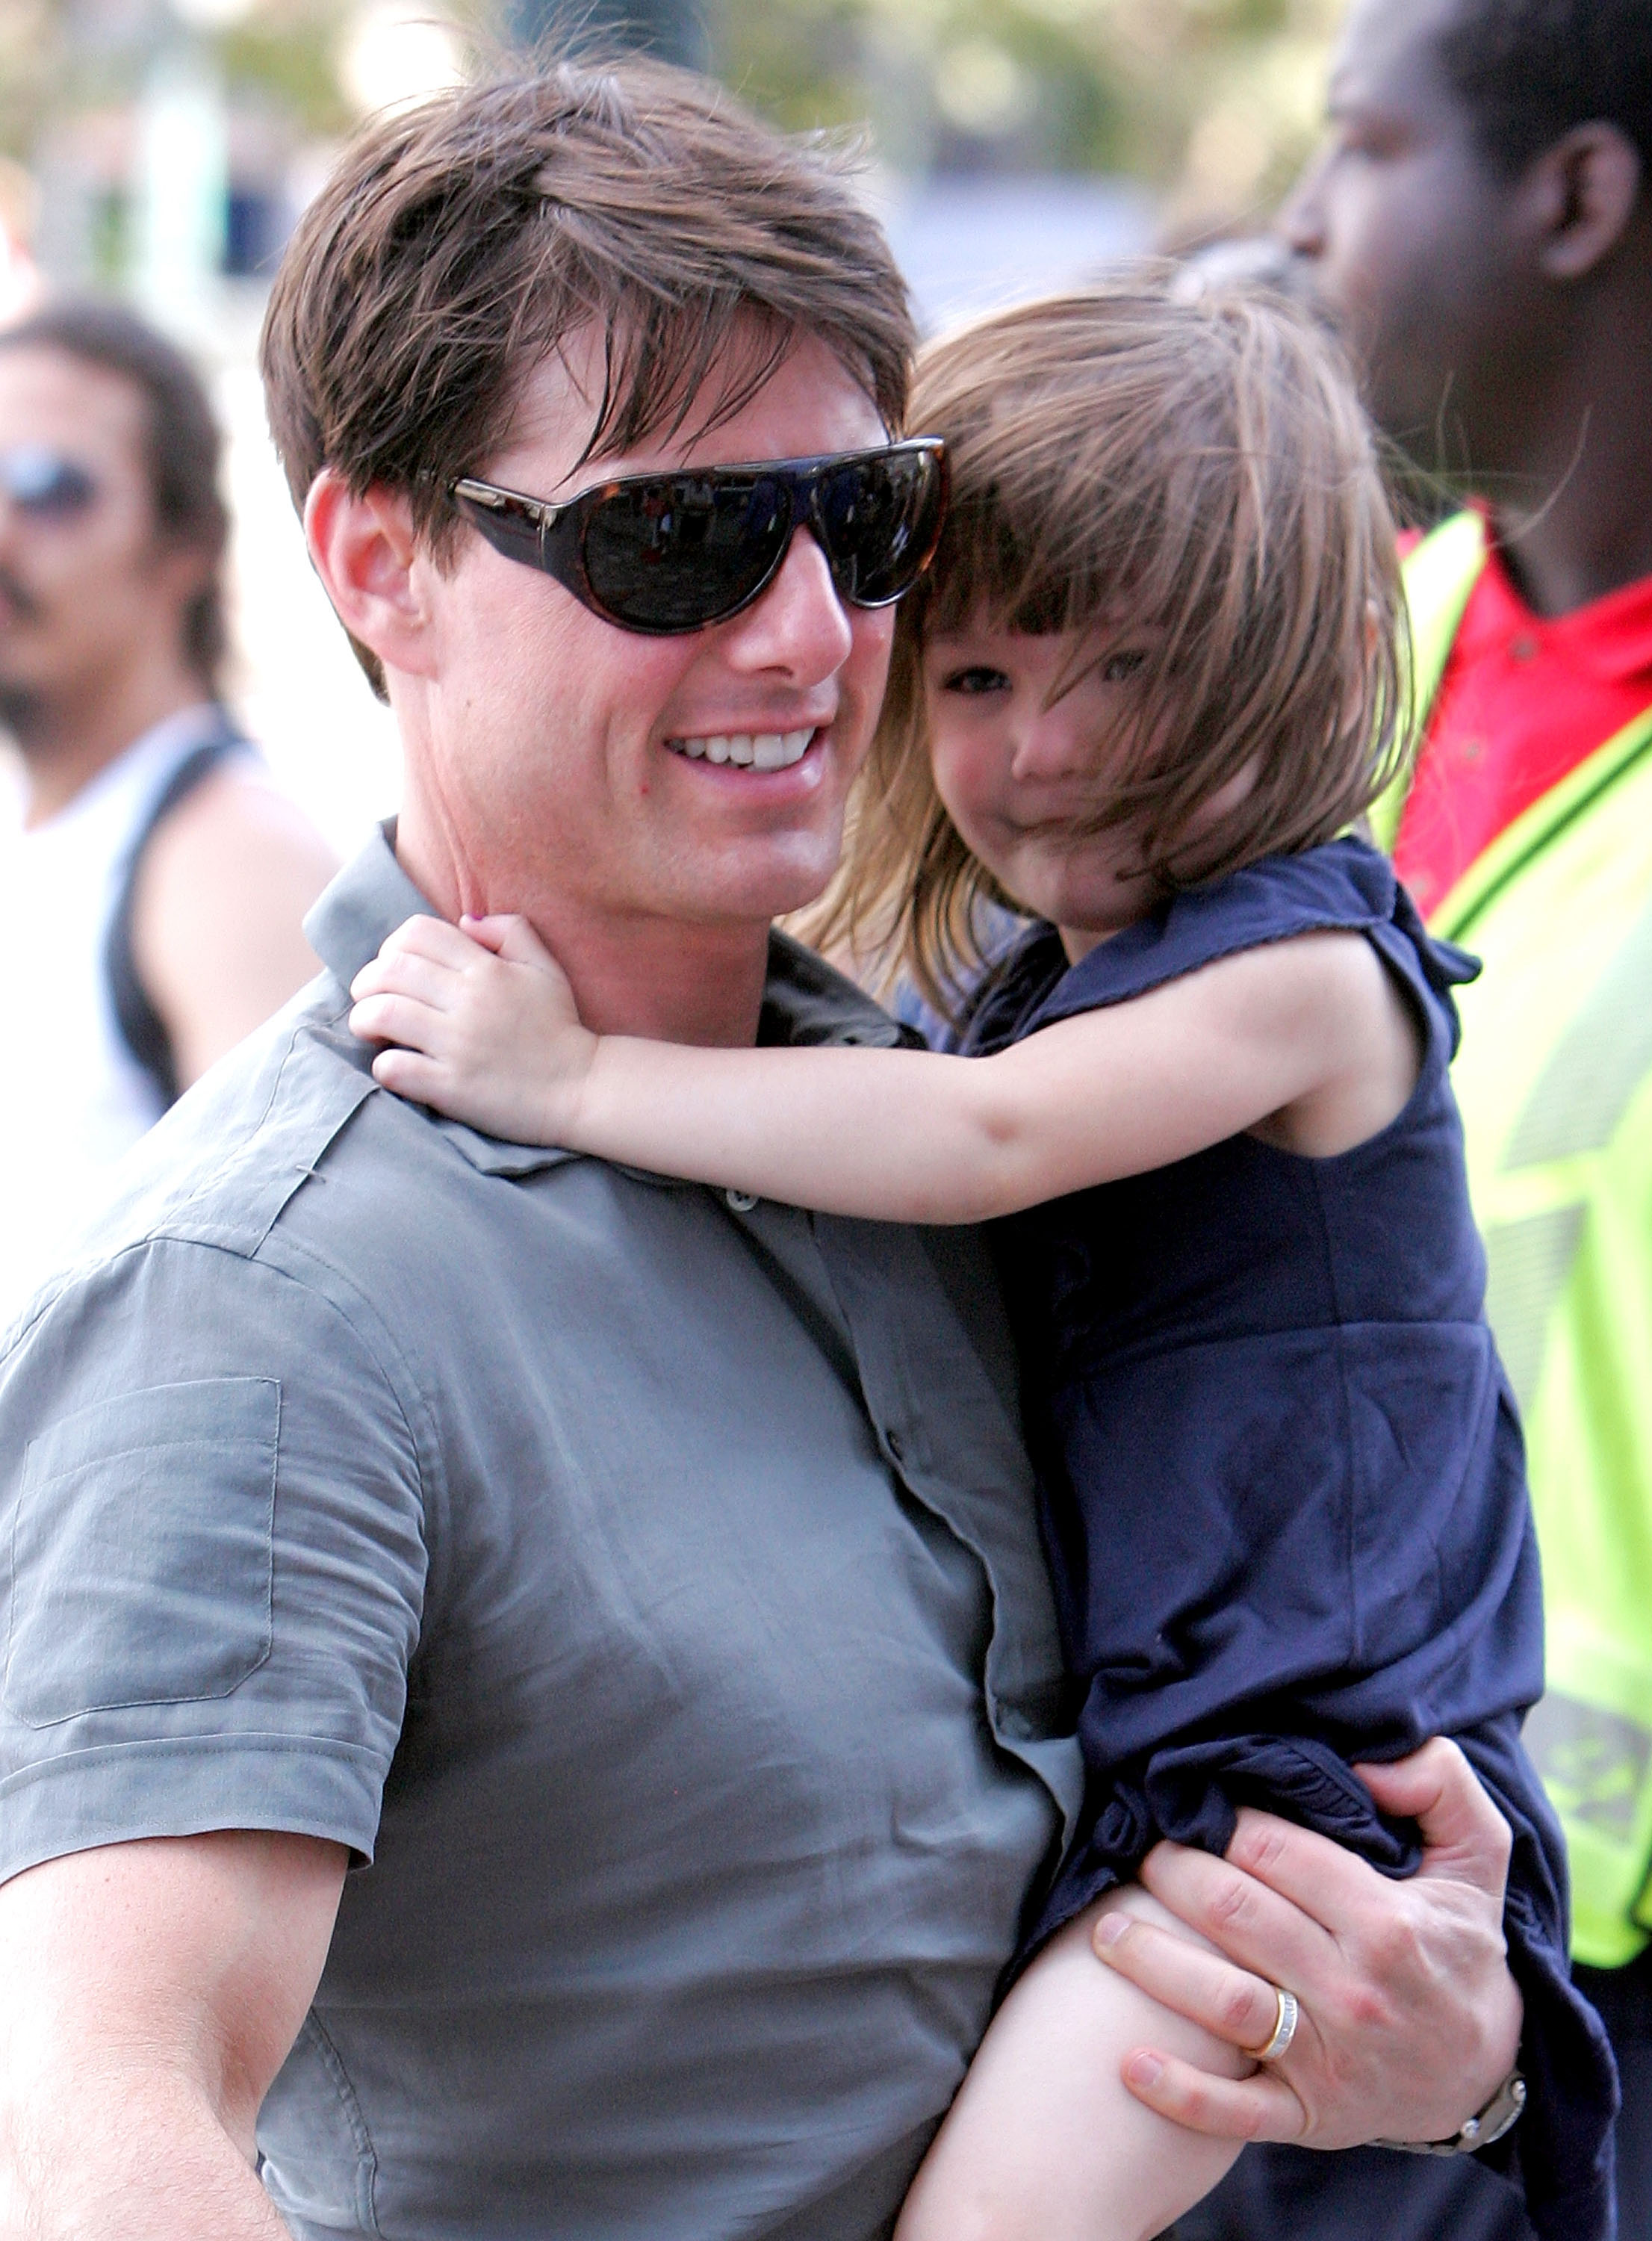 Tom Cruise and his daughter Suri seen on the streets of Manhattan on August 15, 2008, in New York City. | Source: Getty Images